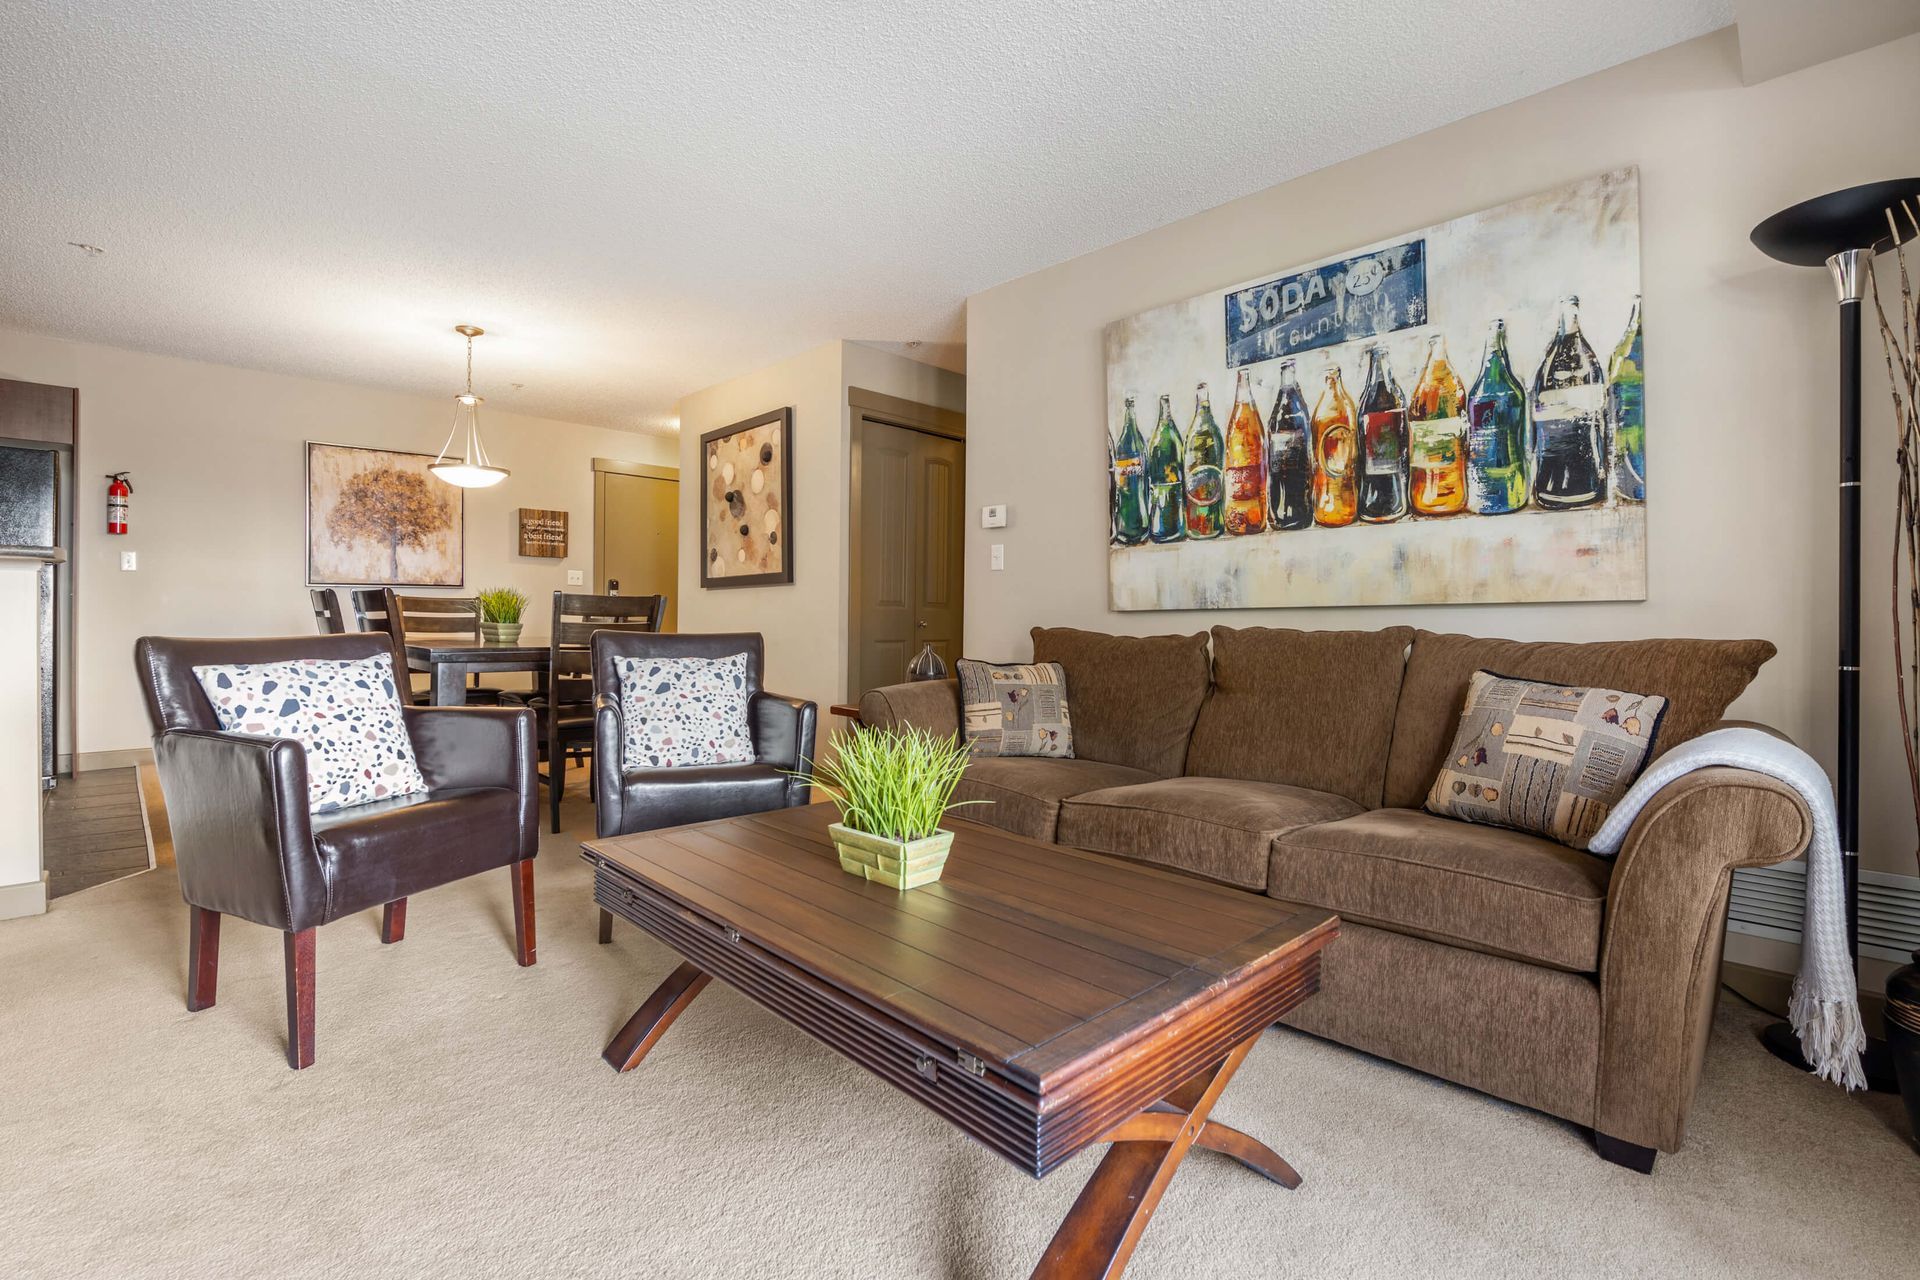 Living room at the Lake Windermere Pointe Condos in Invermere, BC managed by Aisling Baile Property Management